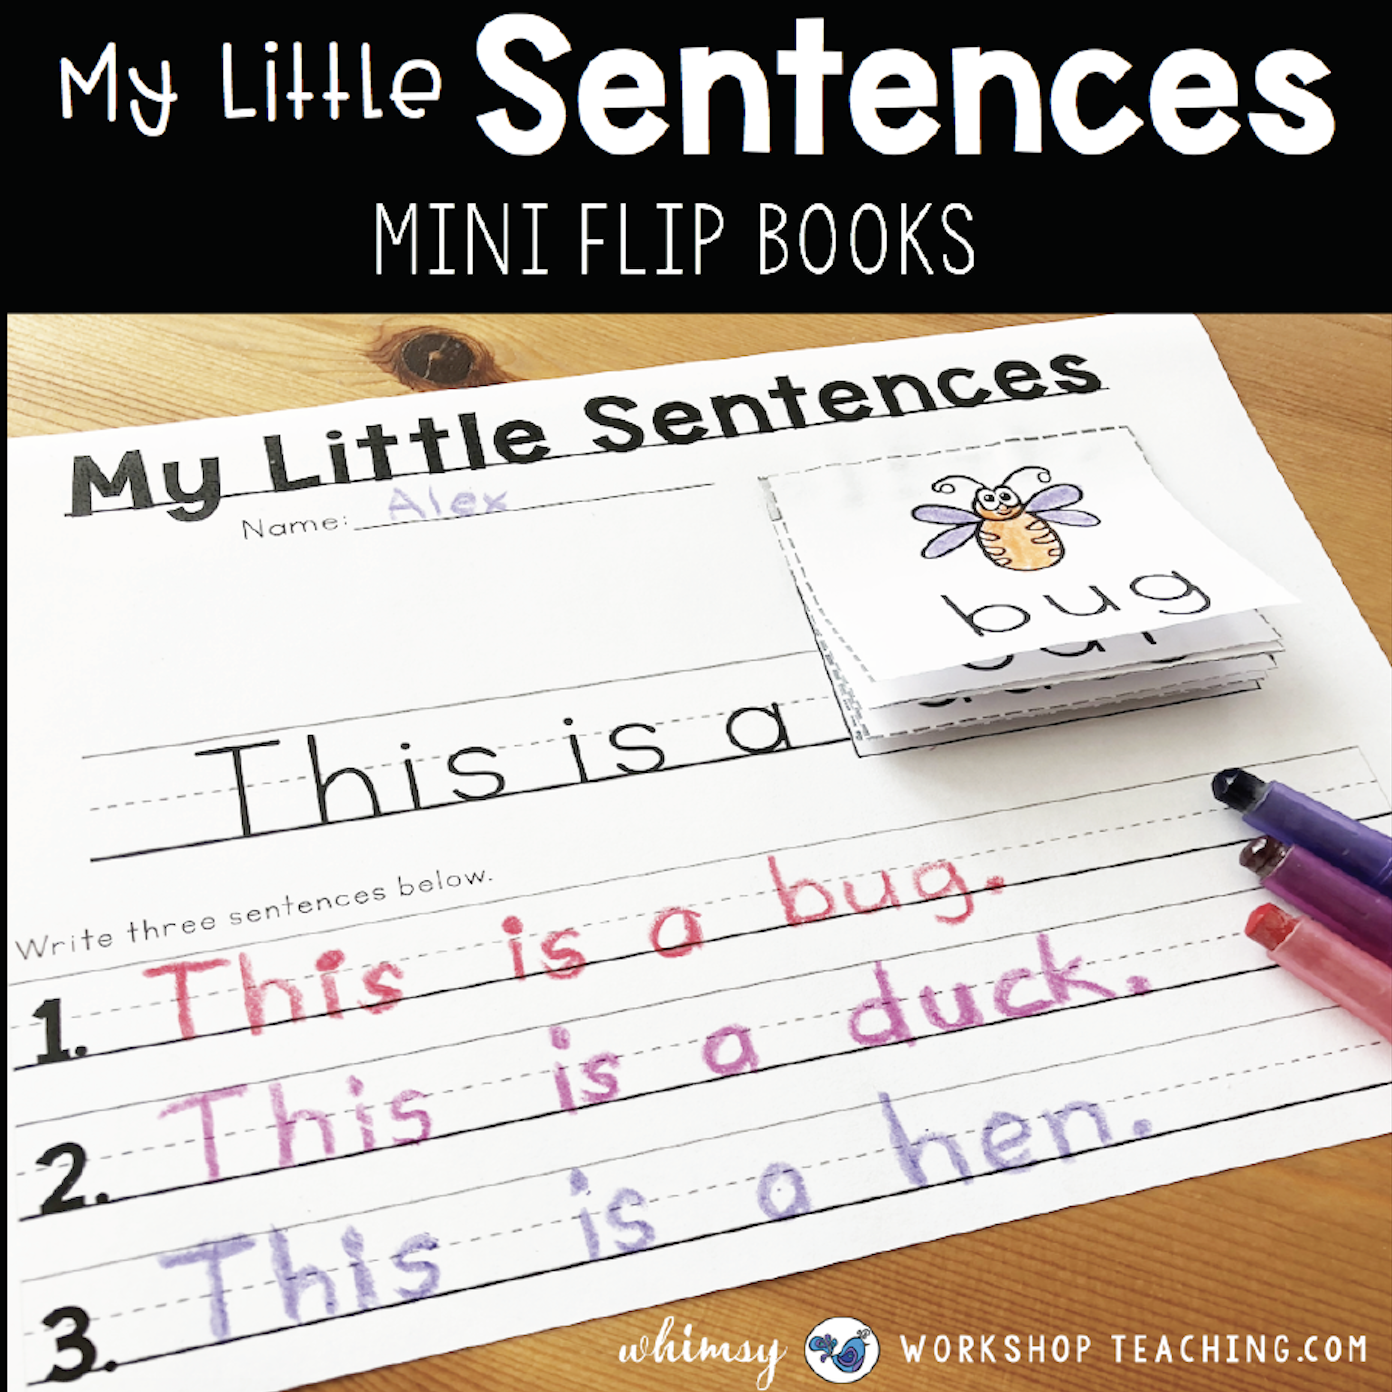 literacy-writing-sentence-building-worksheets-centers-flip-books-kids -easy-fun-activities-first-grade-kit-1 - Whimsy Workshop Teaching